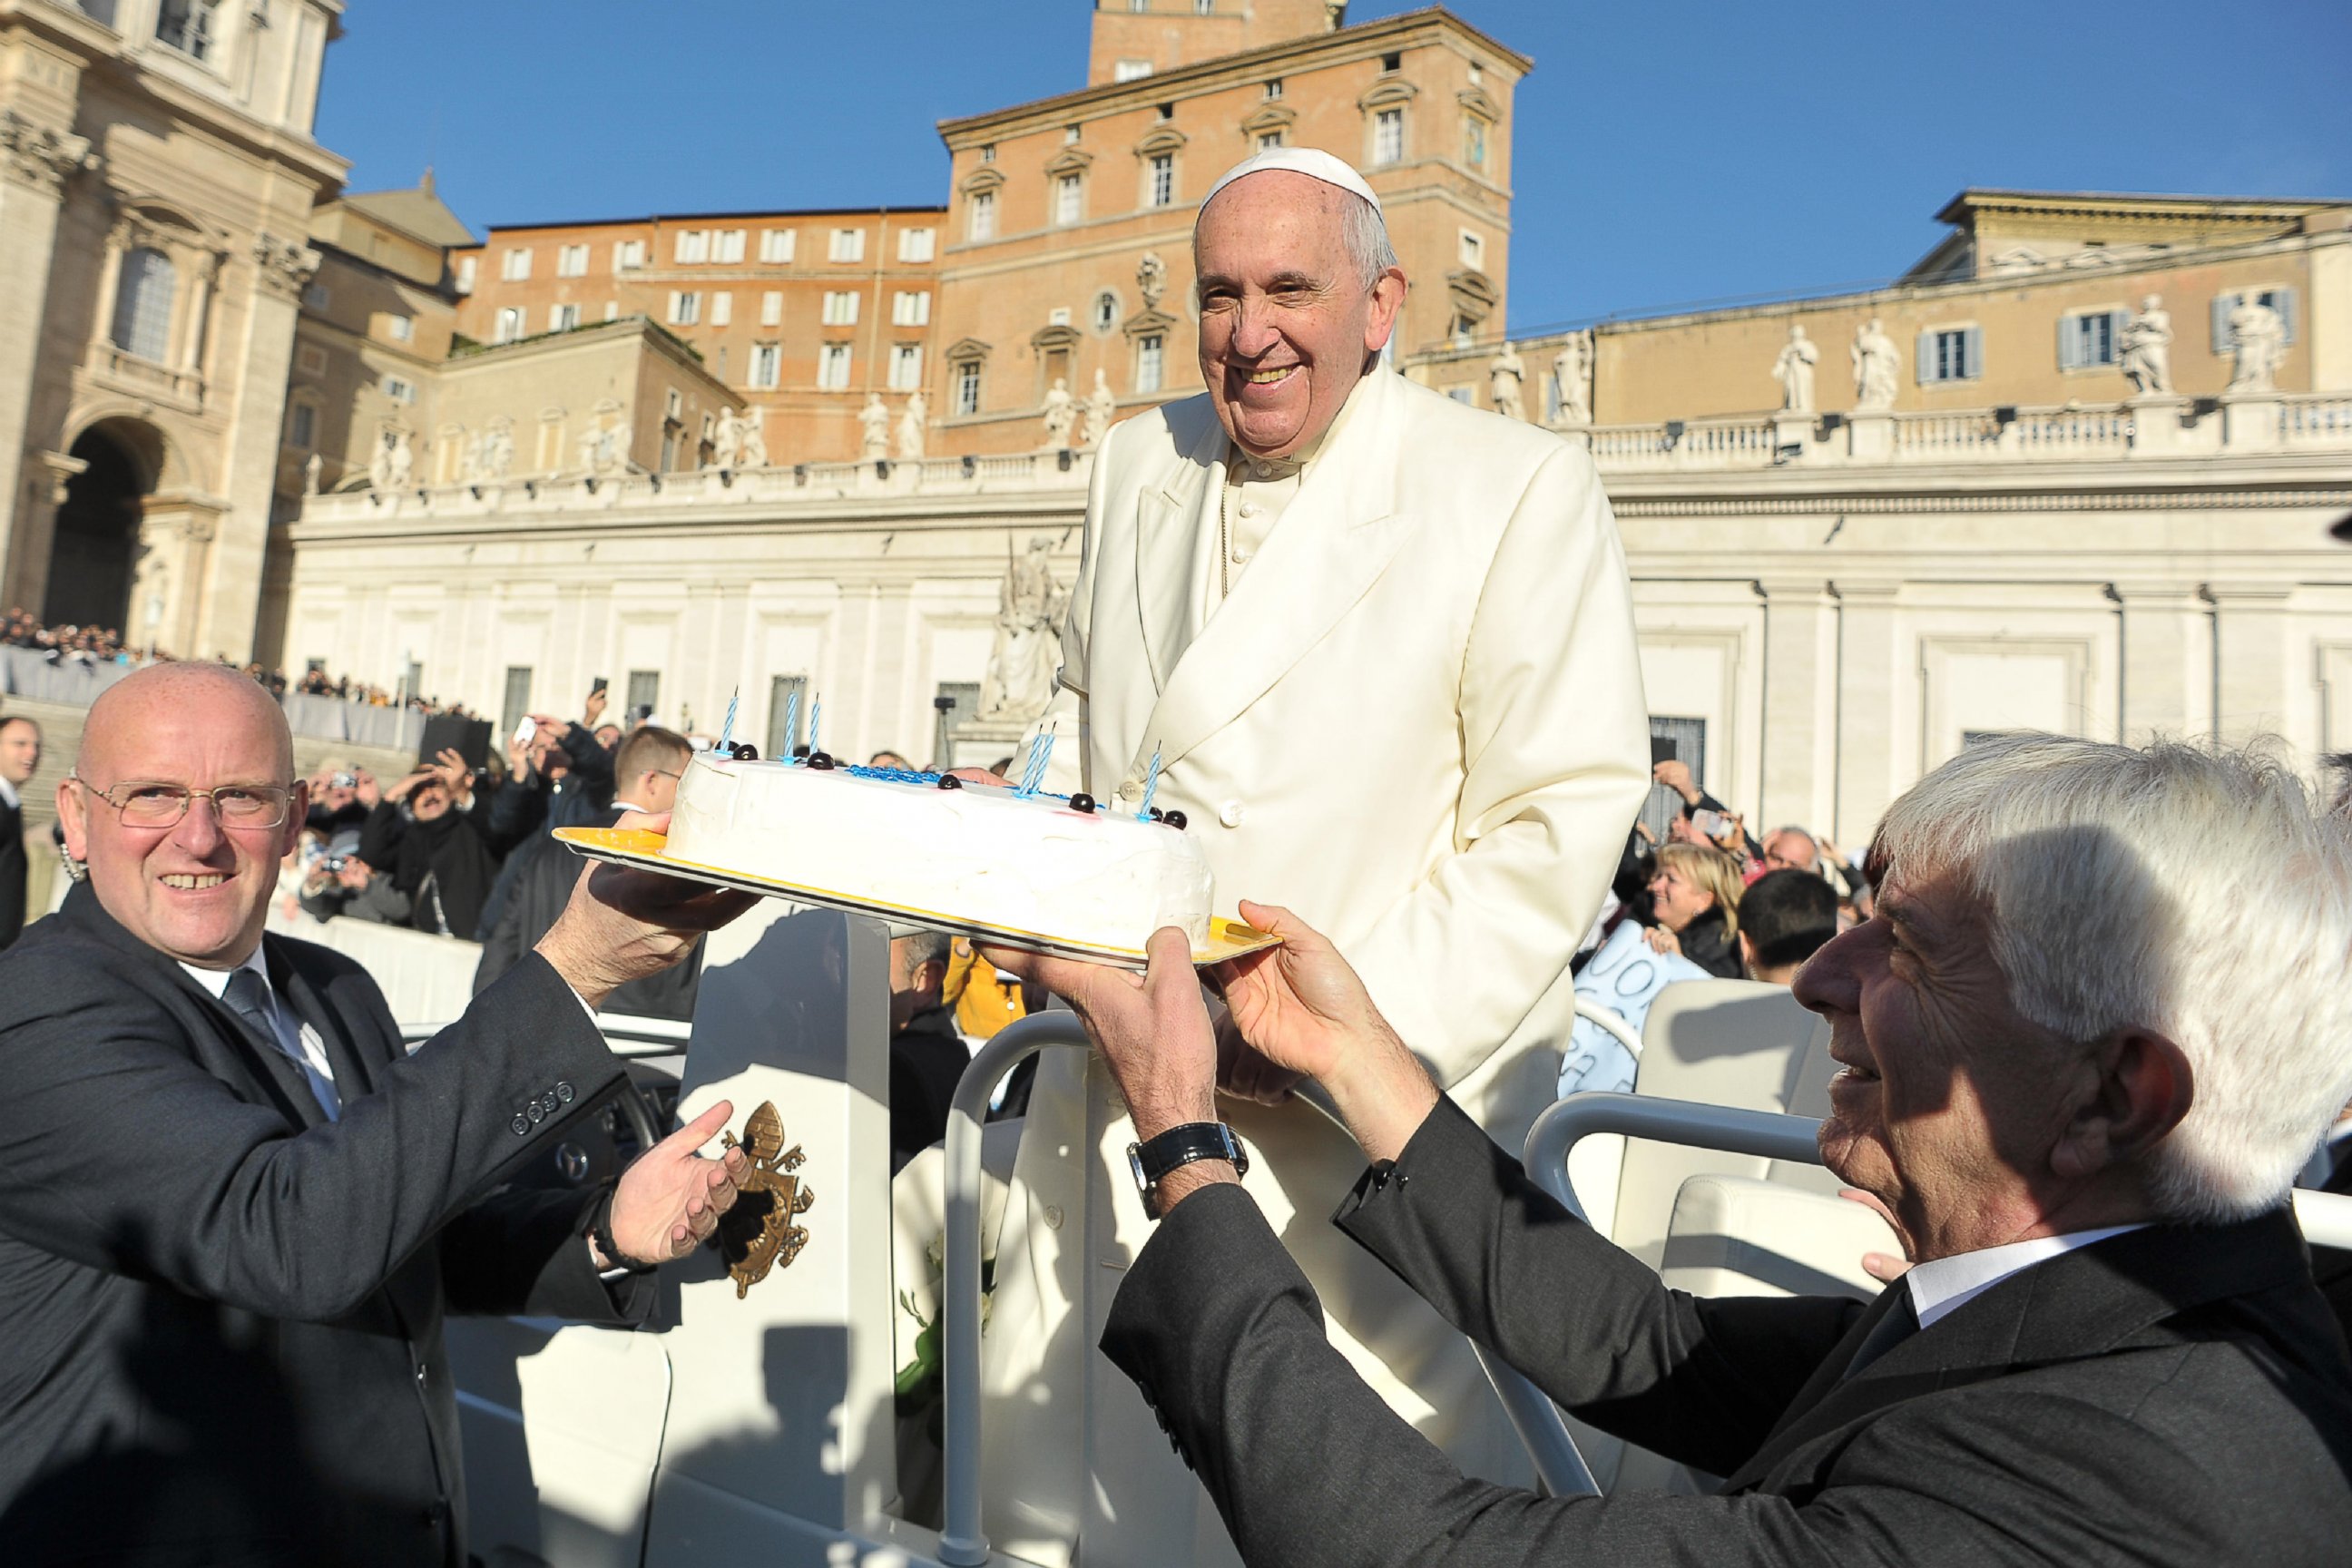 PHOTO: In this photo provided by Vatican newspaper L'Osservatore Romano, Pope Francis is presented with a cake during his weekly general audience in St. Peter's Square at the Vatican on Dec. 17, 2014.